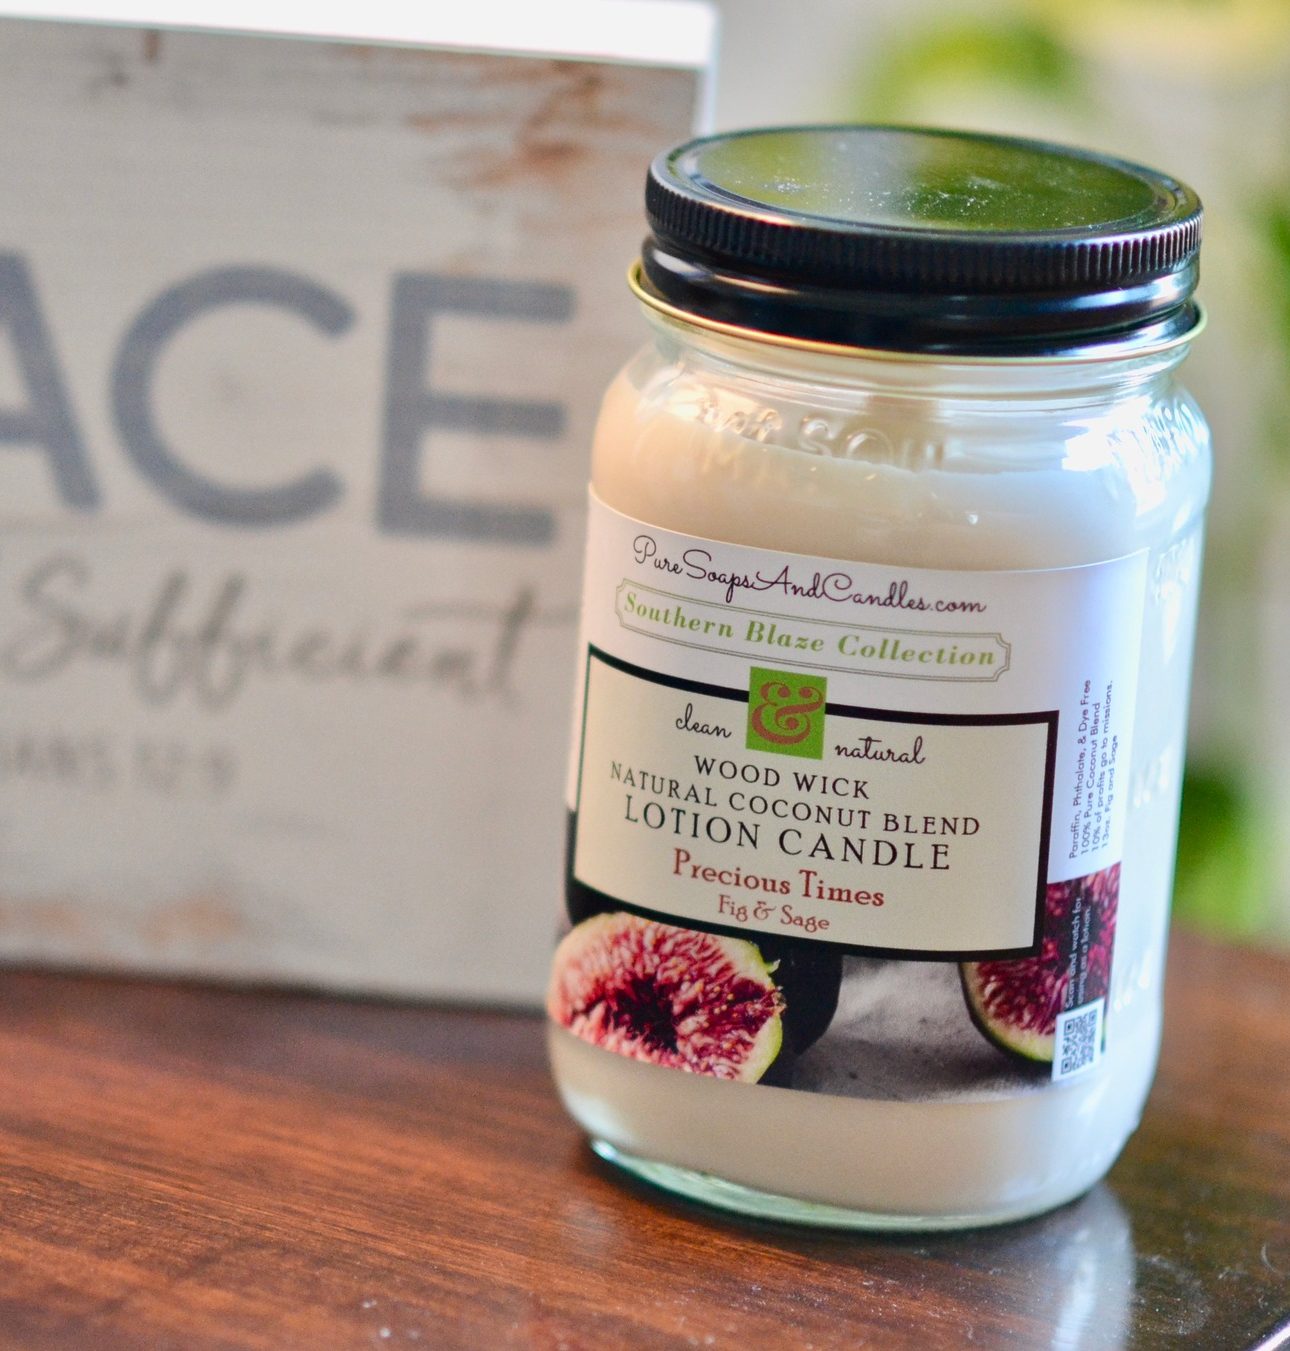 Fig & Sage Wood Wick Lotion Candle